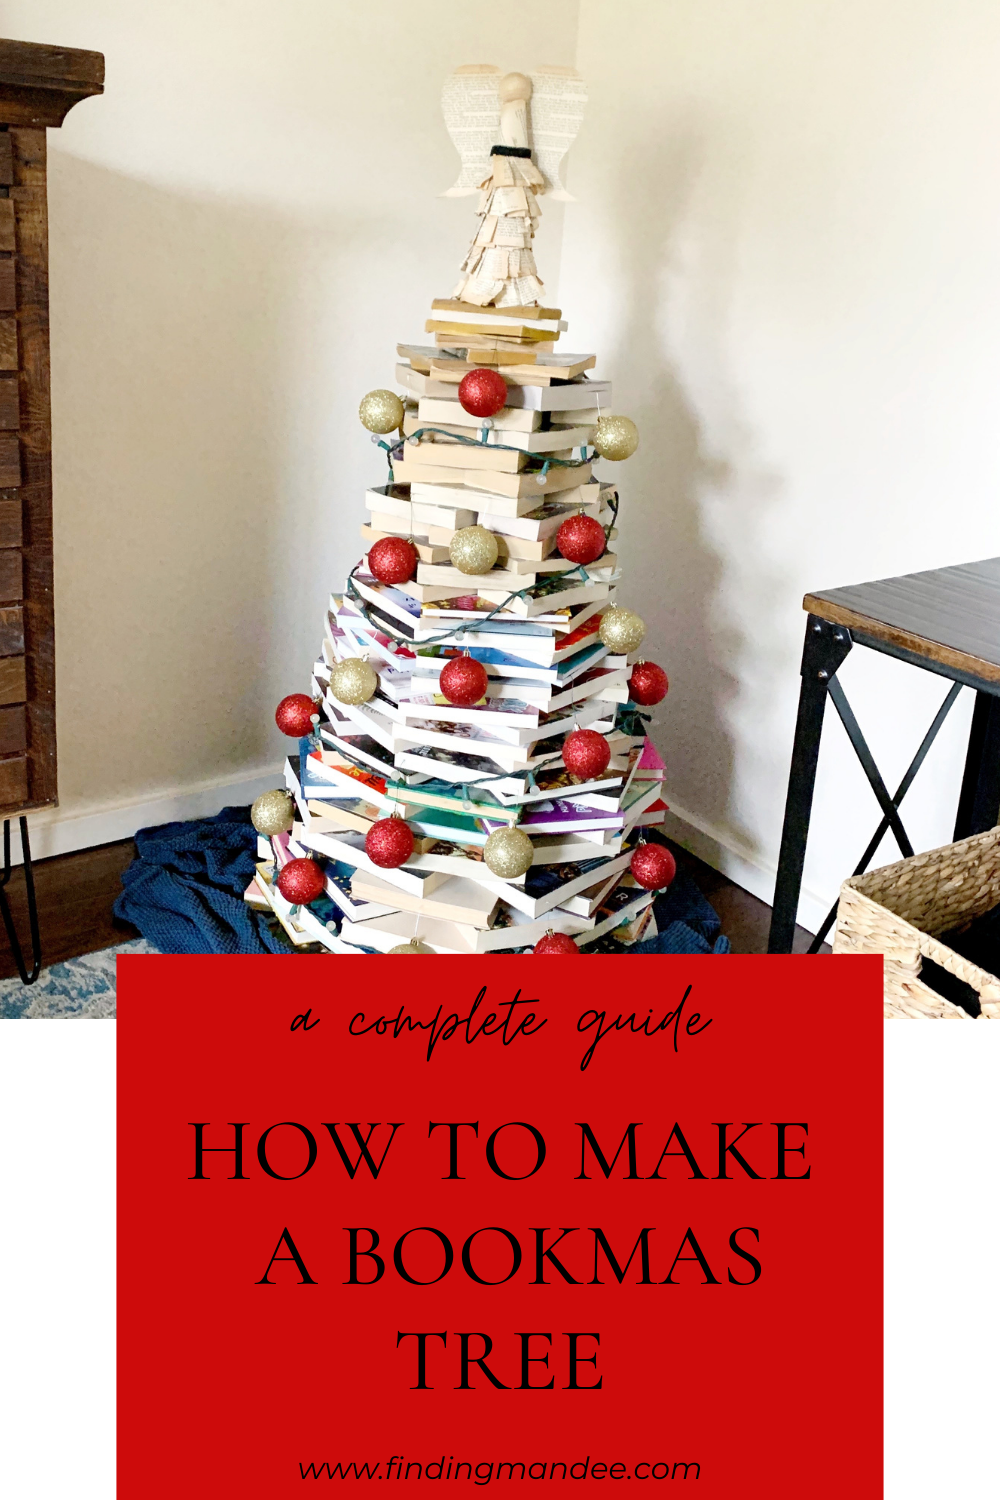 How to Make a Bookmas Tree | Finding Mandee